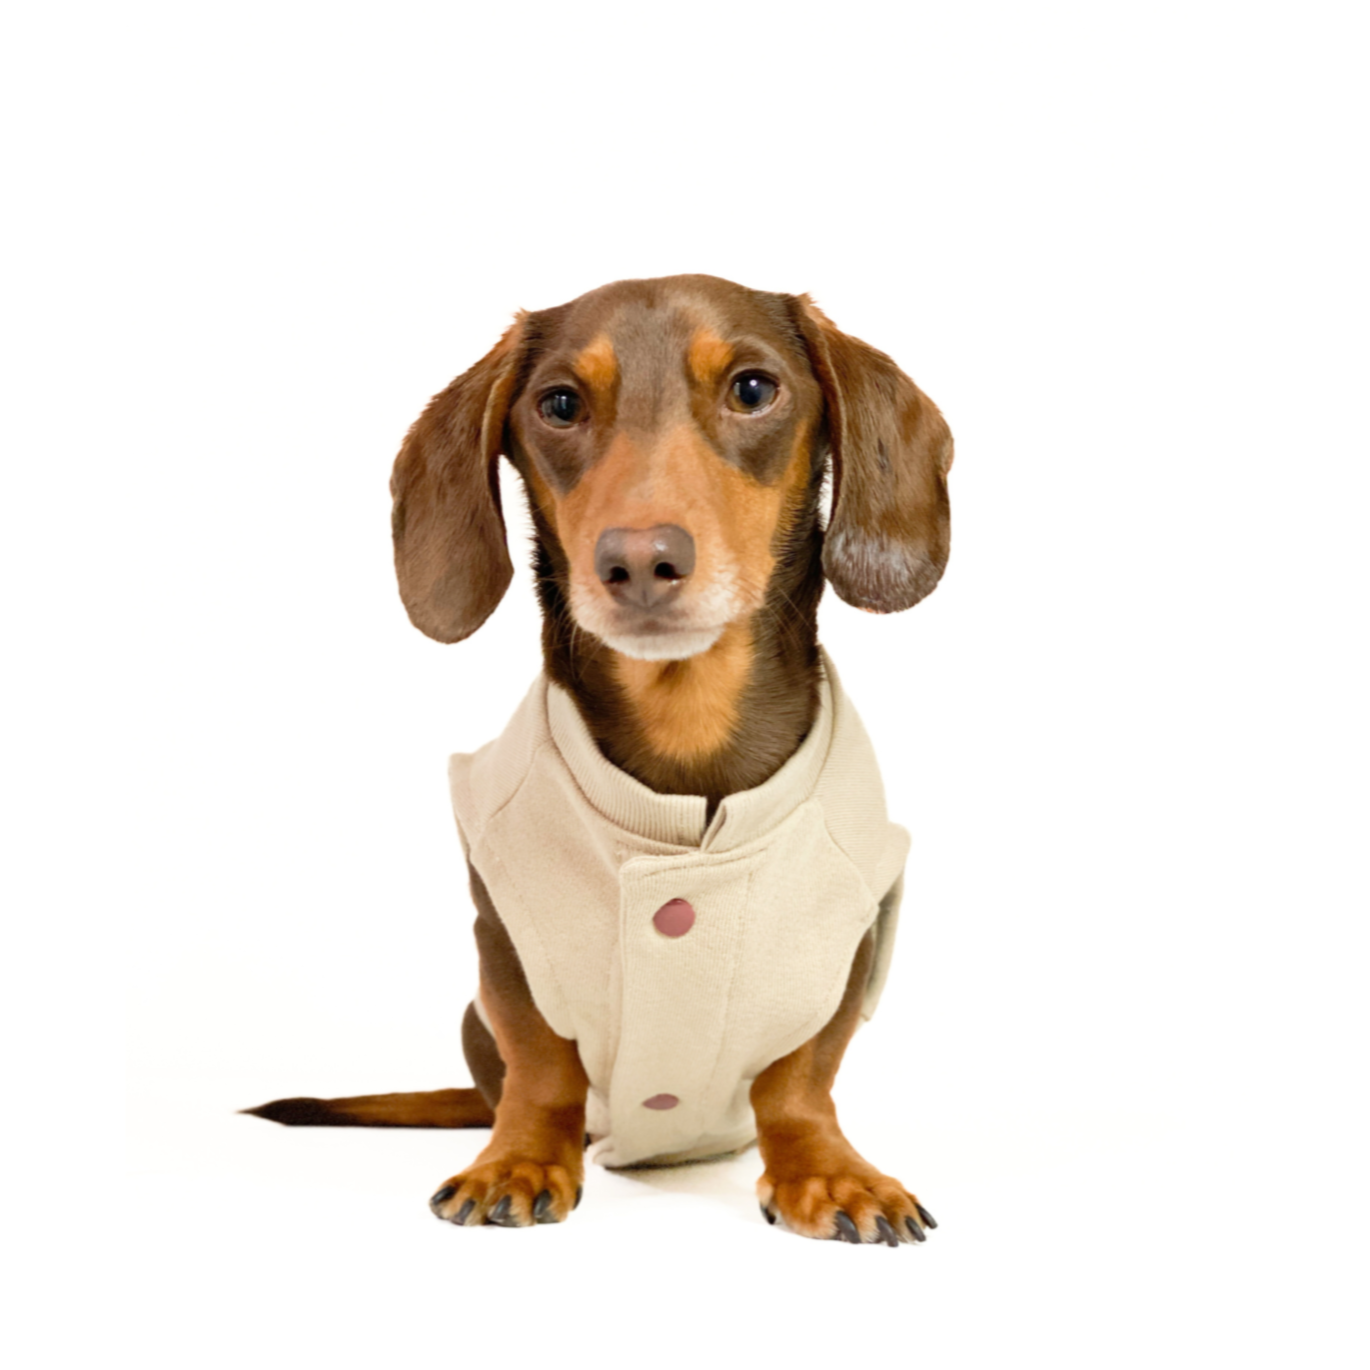 Dachshund in button up sweater front shot